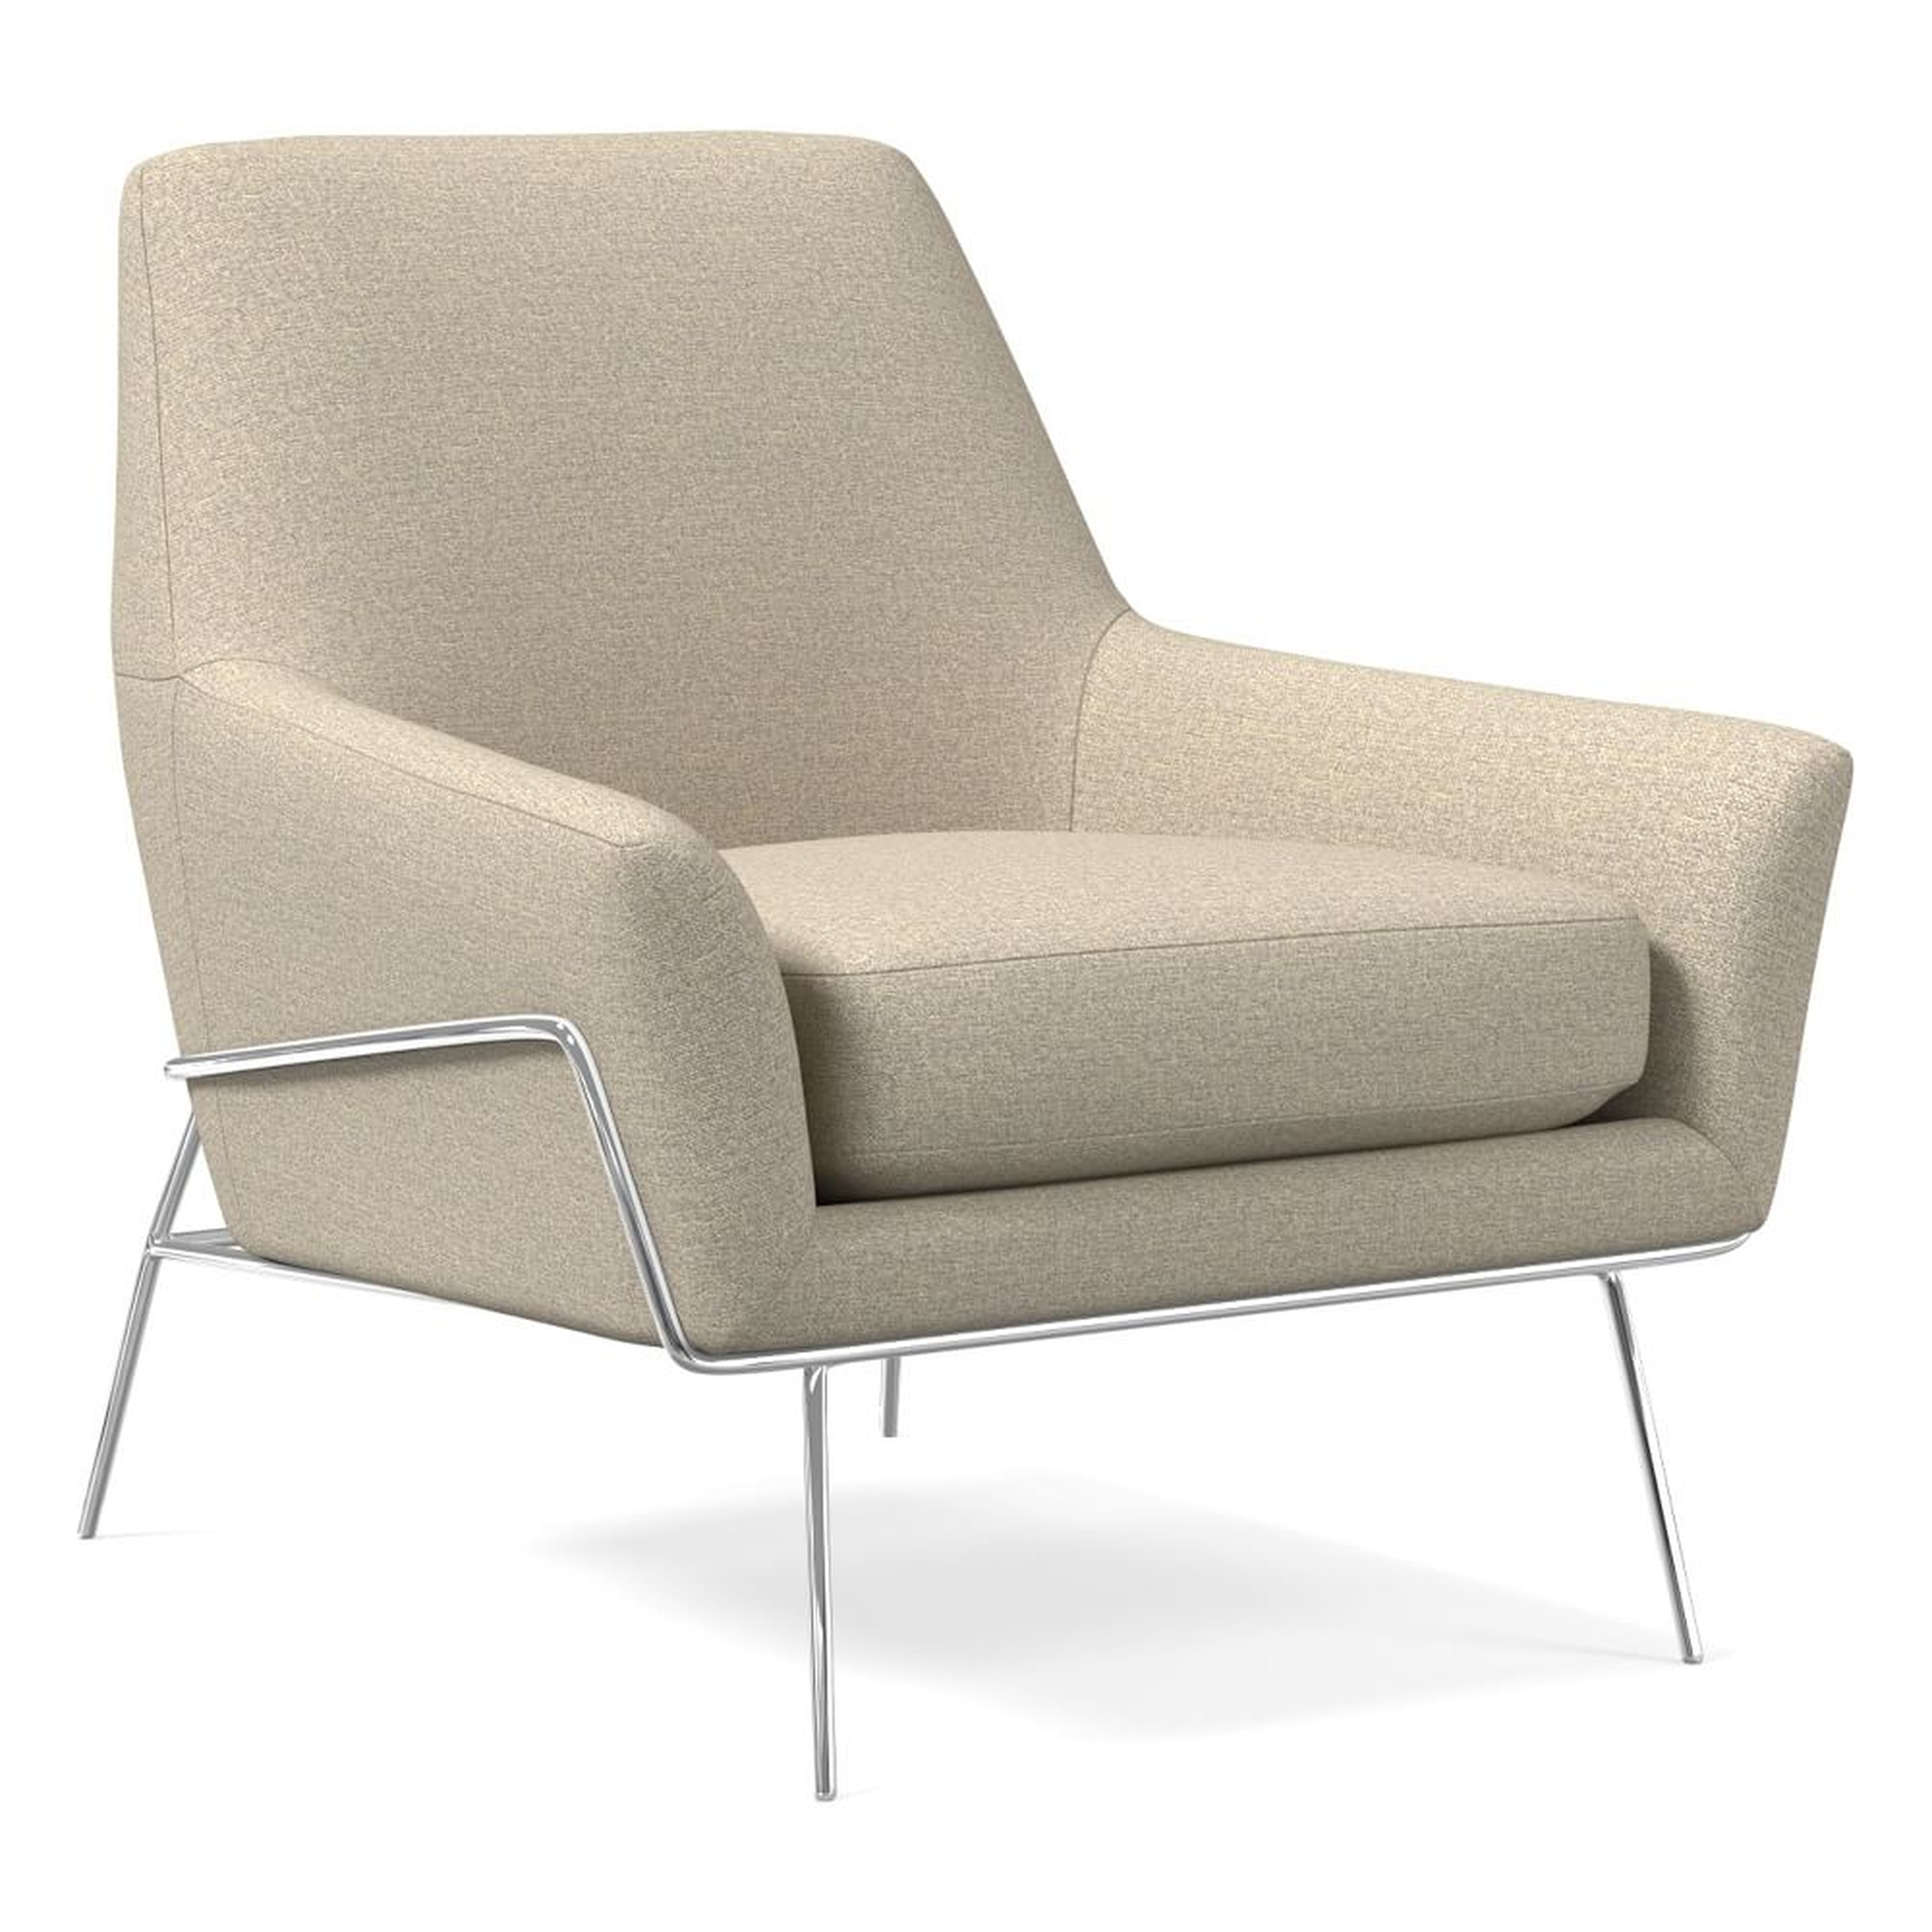 Lucas Wire Base Chair, Poly, Chenille Tweed, Dove, Polished Nickel - West Elm